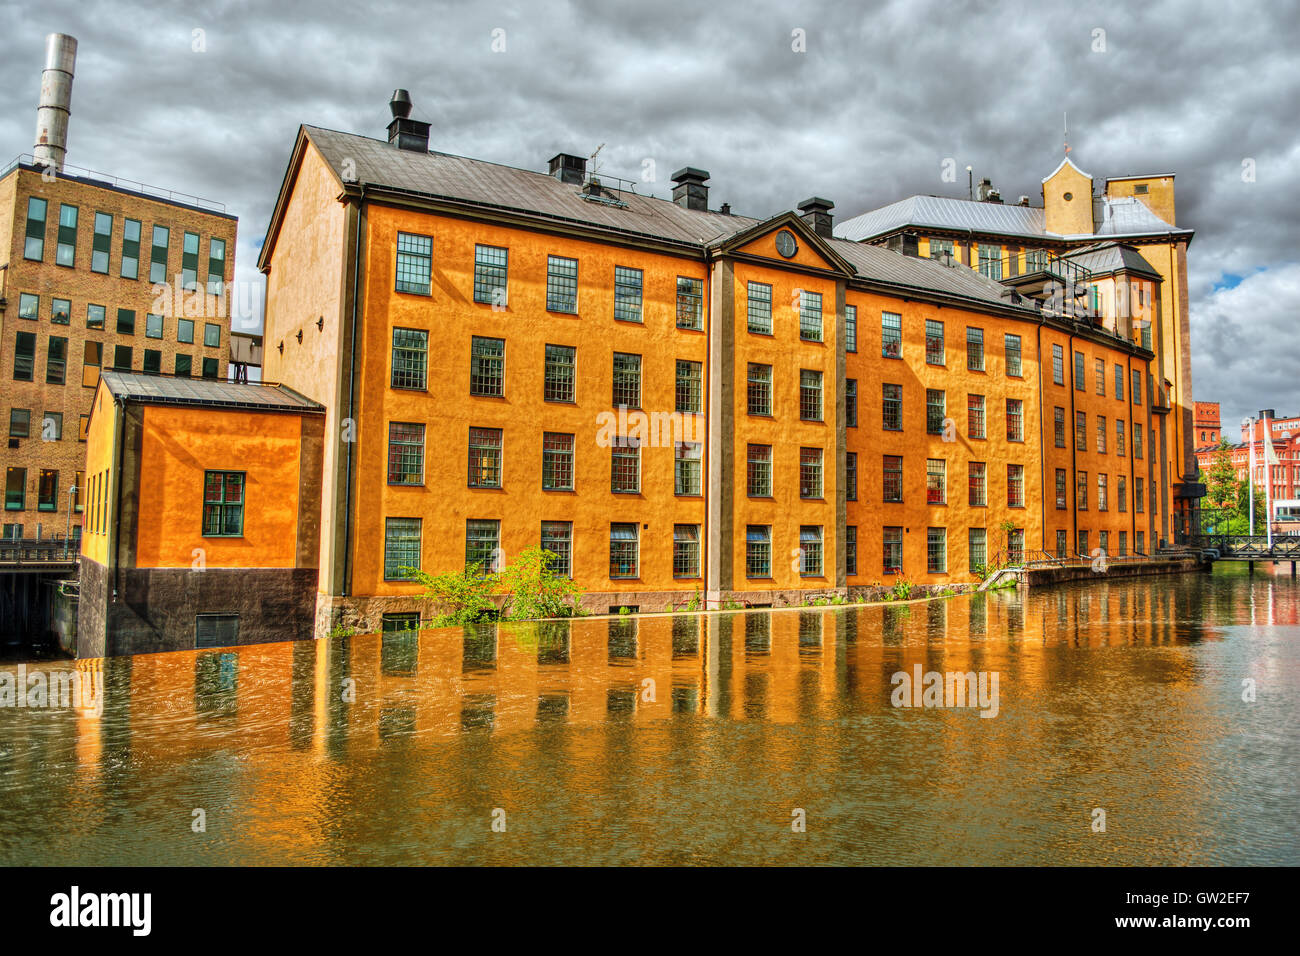 July 2016, industrial building in Norrköping (Sweden), HDR-technique Stock Photo